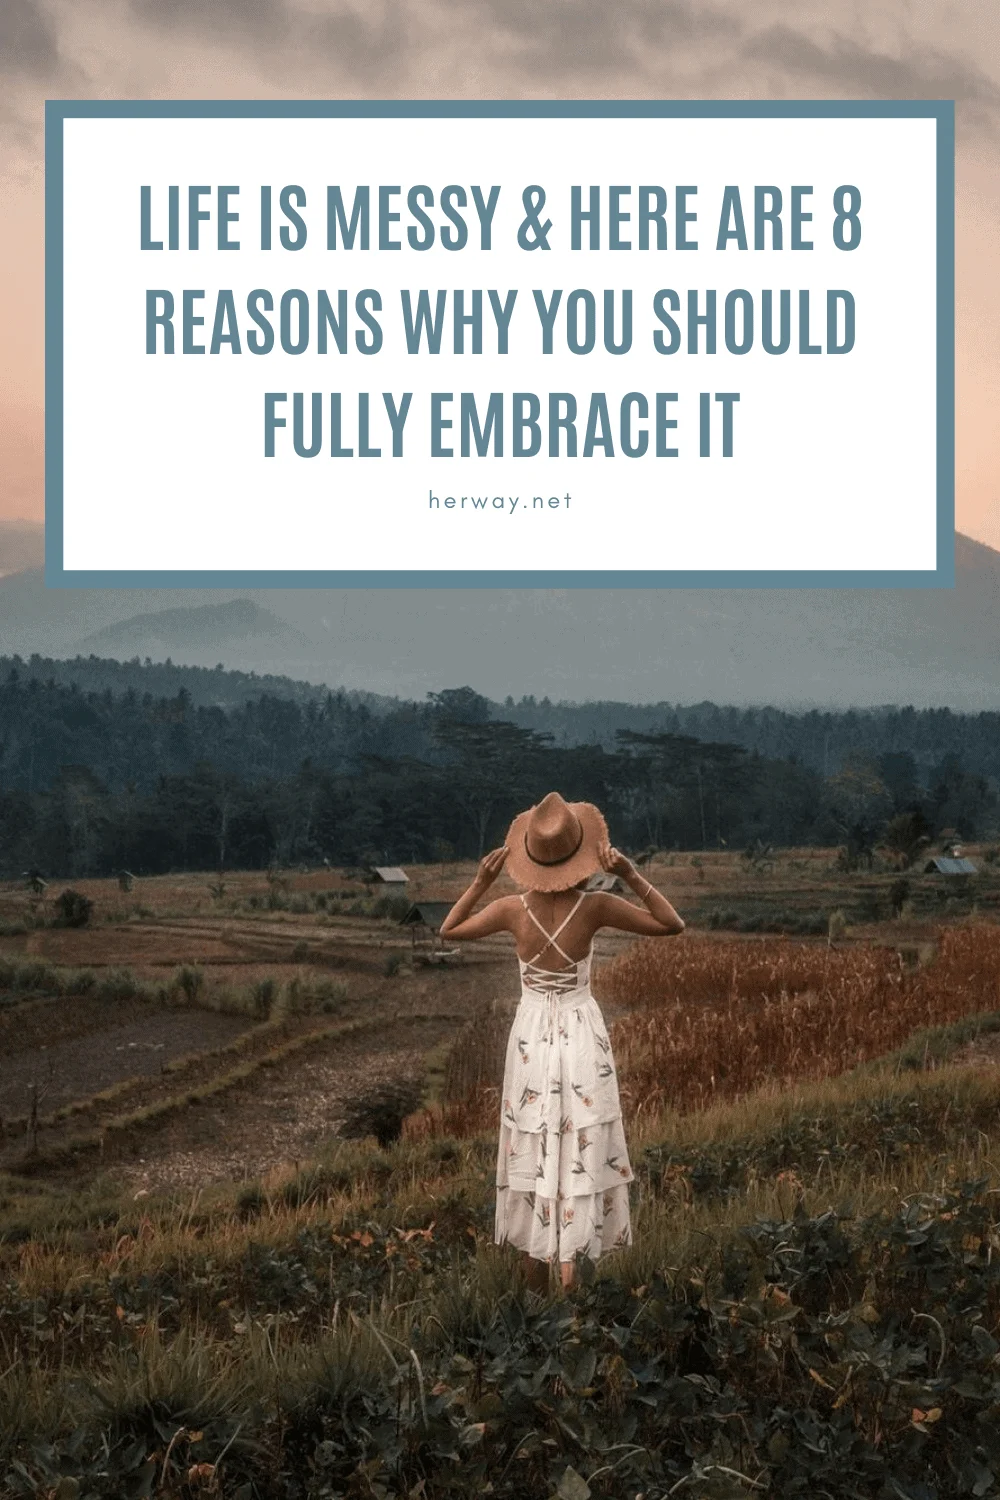 Life Is Messy & Here Are 8 Reasons Why You Should Fully Embrace It